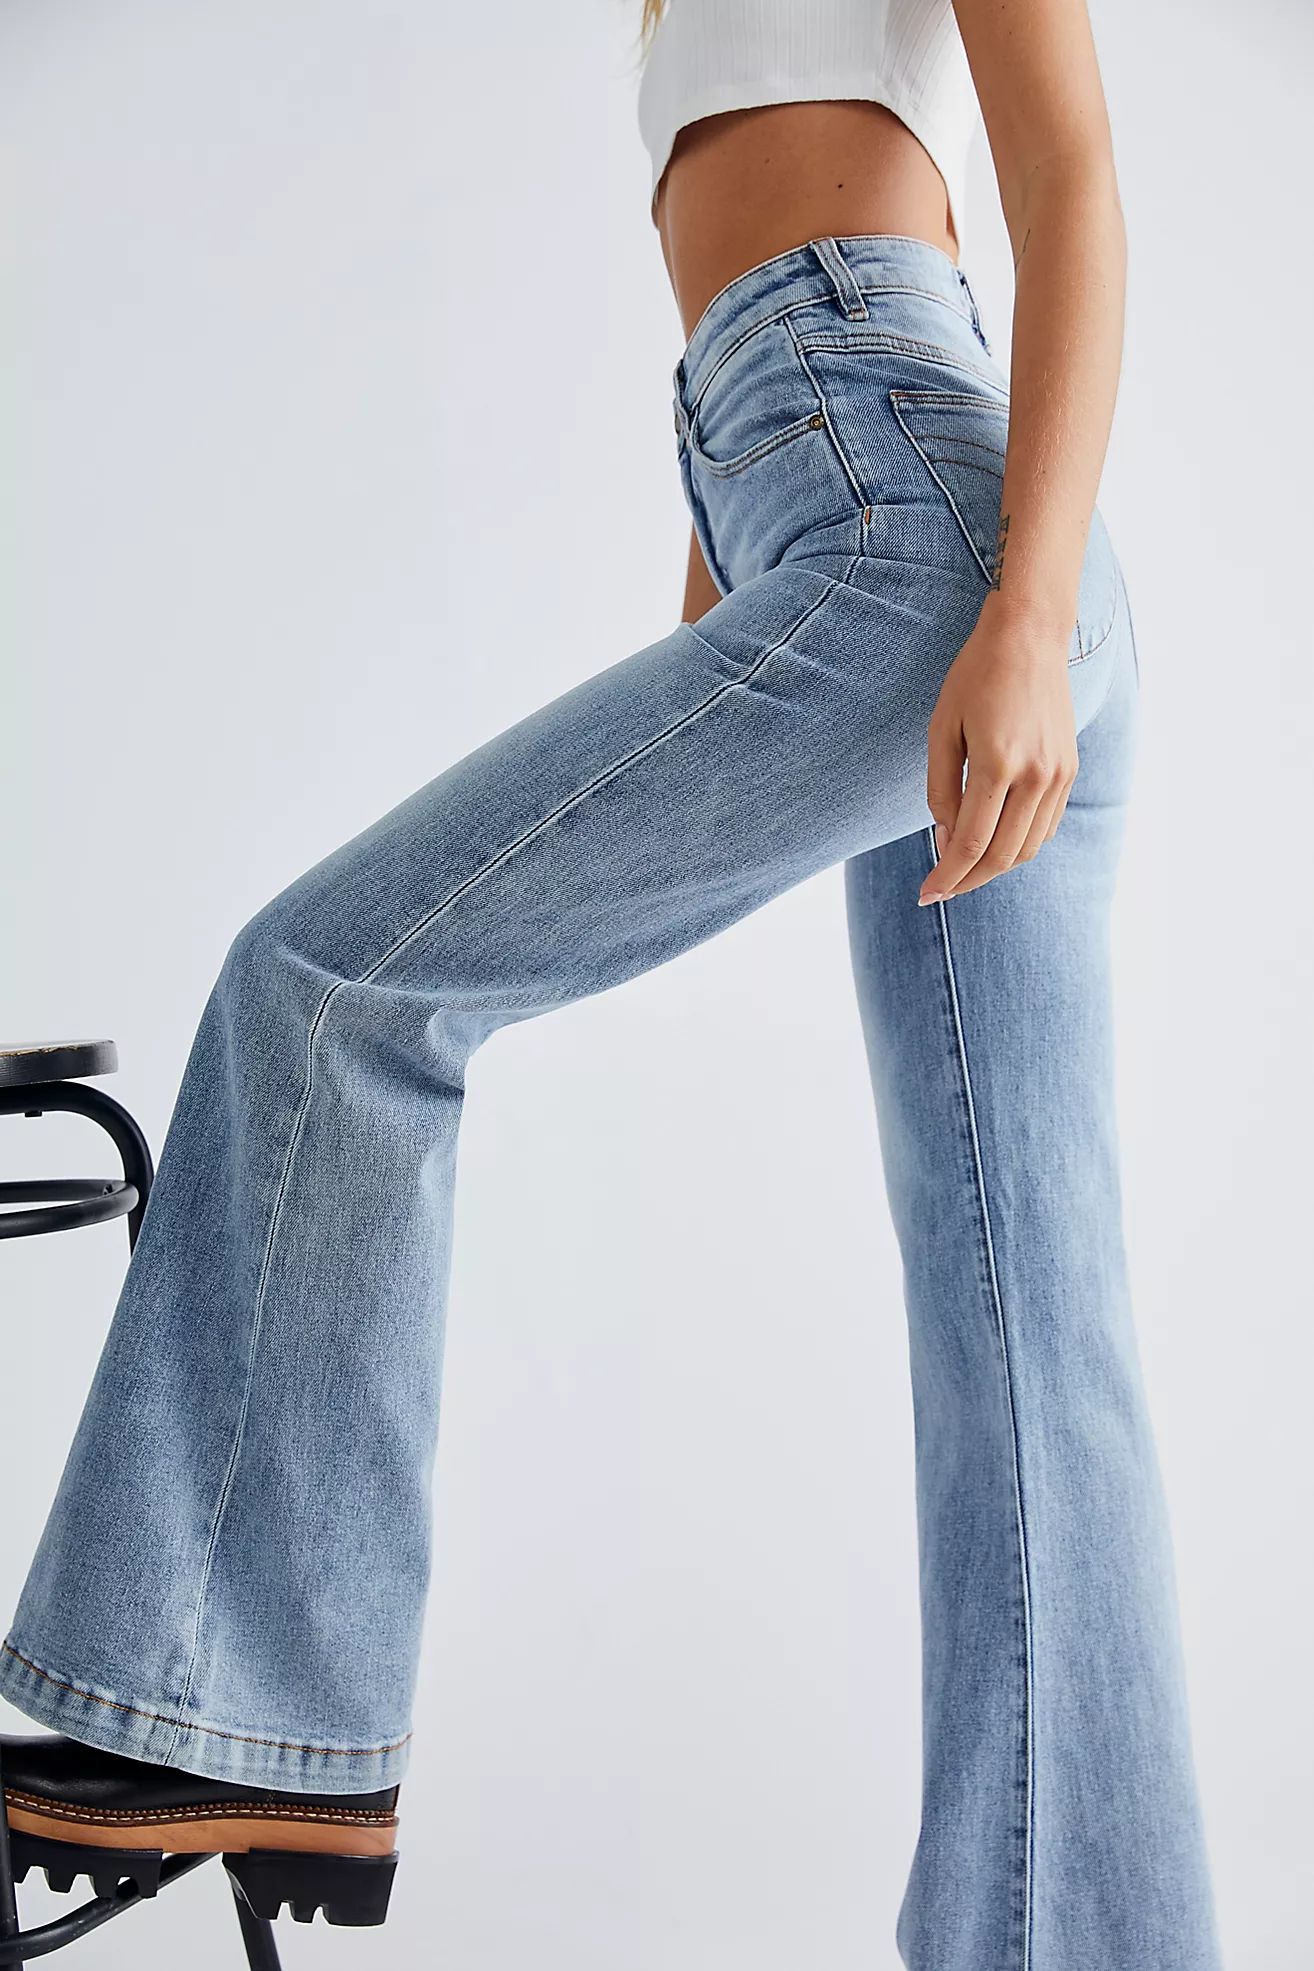 Rolla's East Coast Flare Jeans | Free People (Global - UK&FR Excluded)